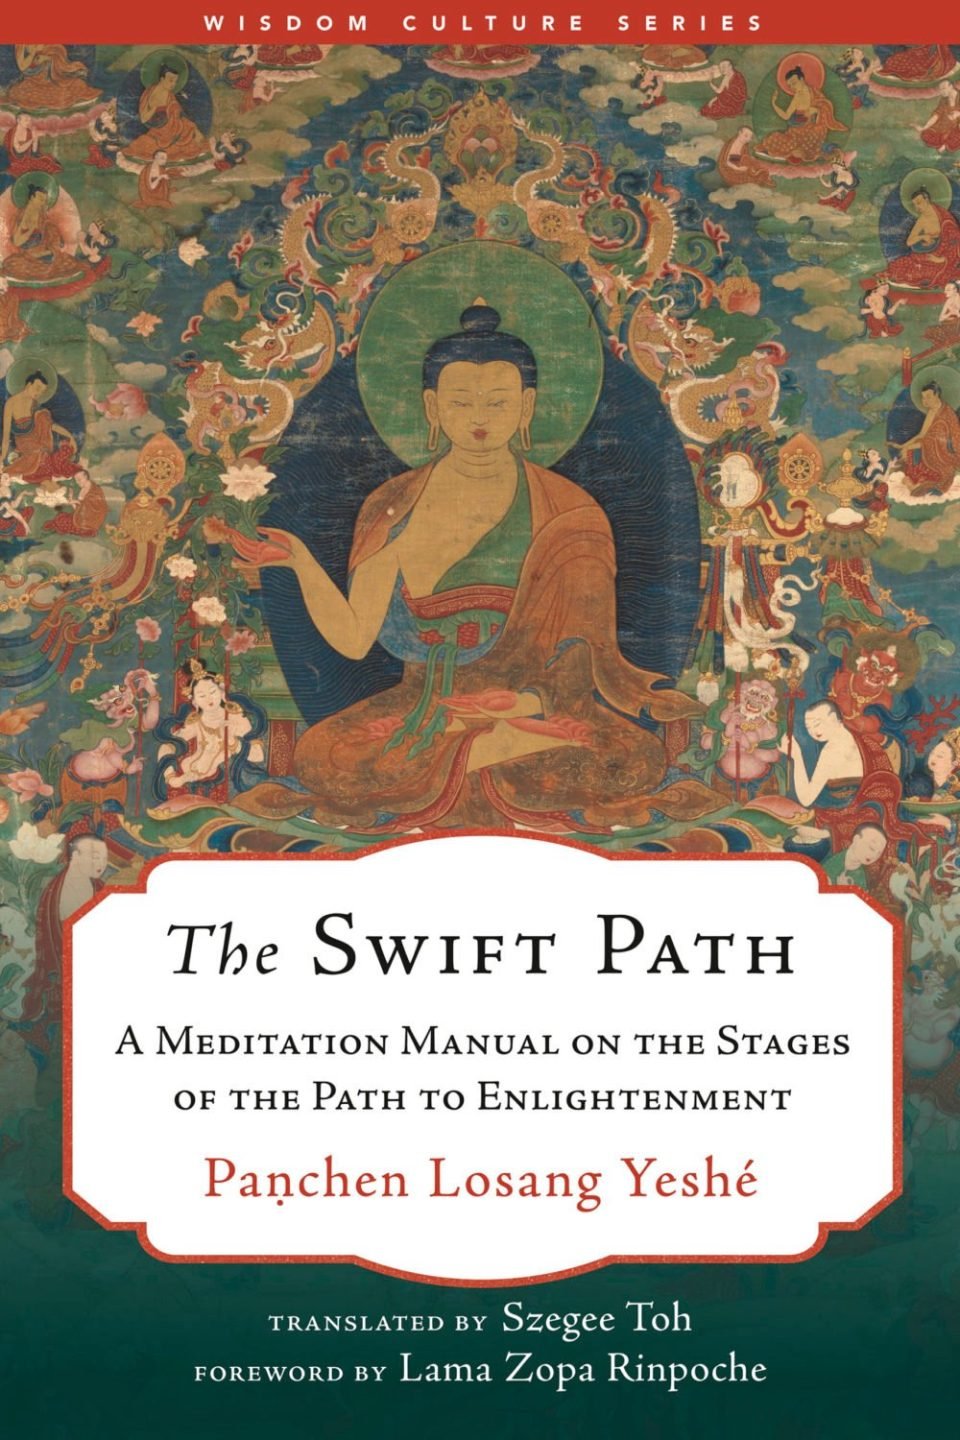 Wisdom Publications Releases The Swift Path